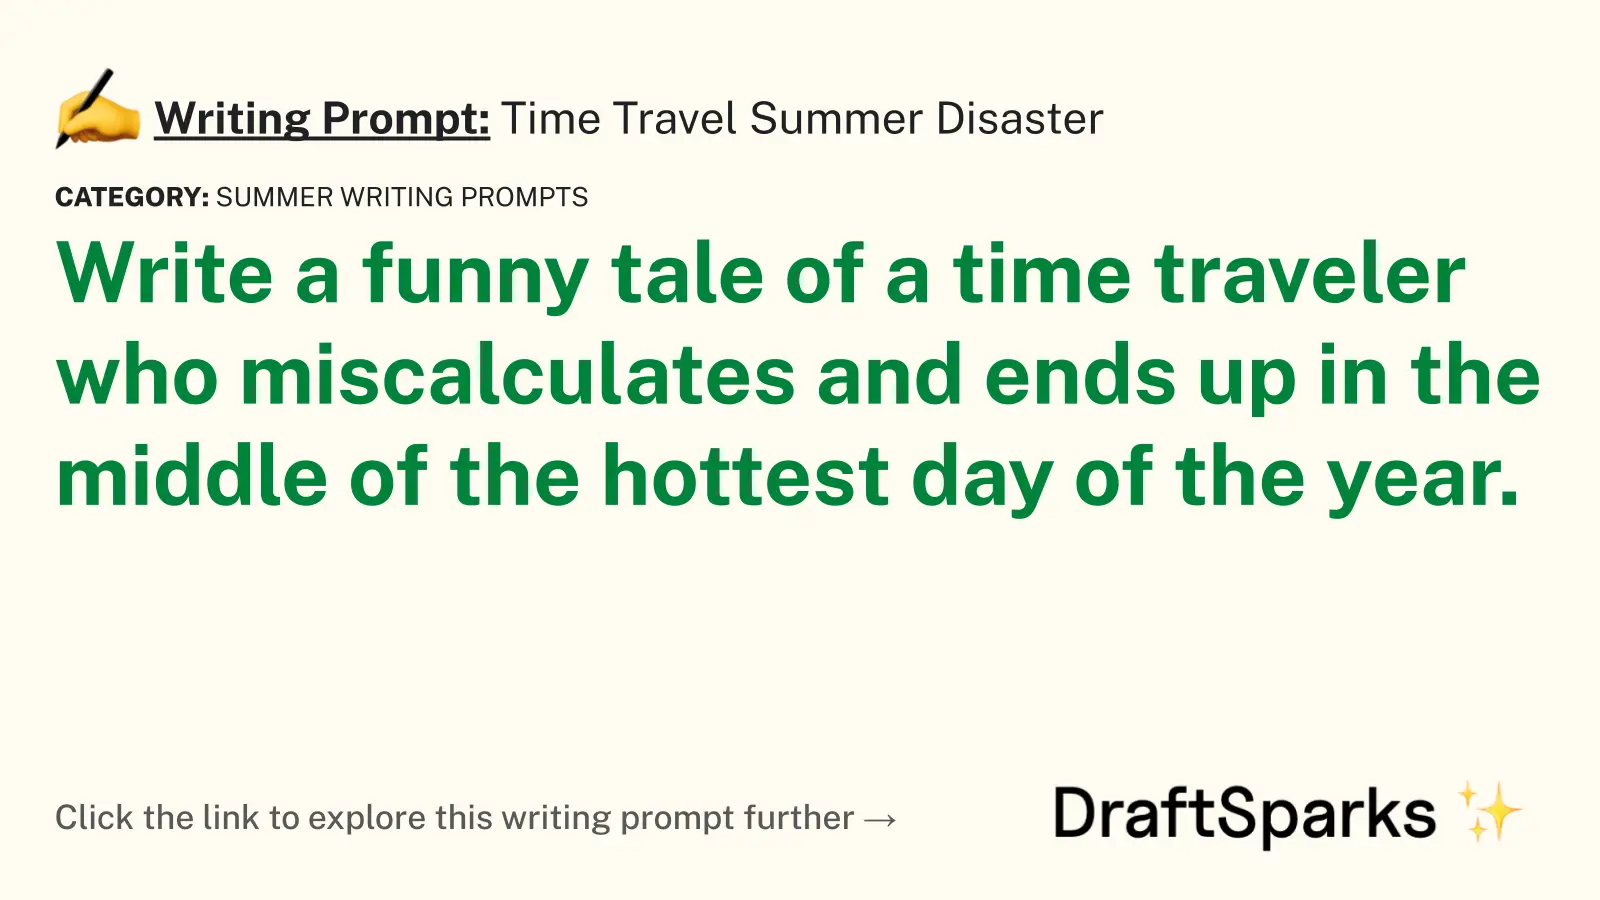 Time Travel Summer Disaster